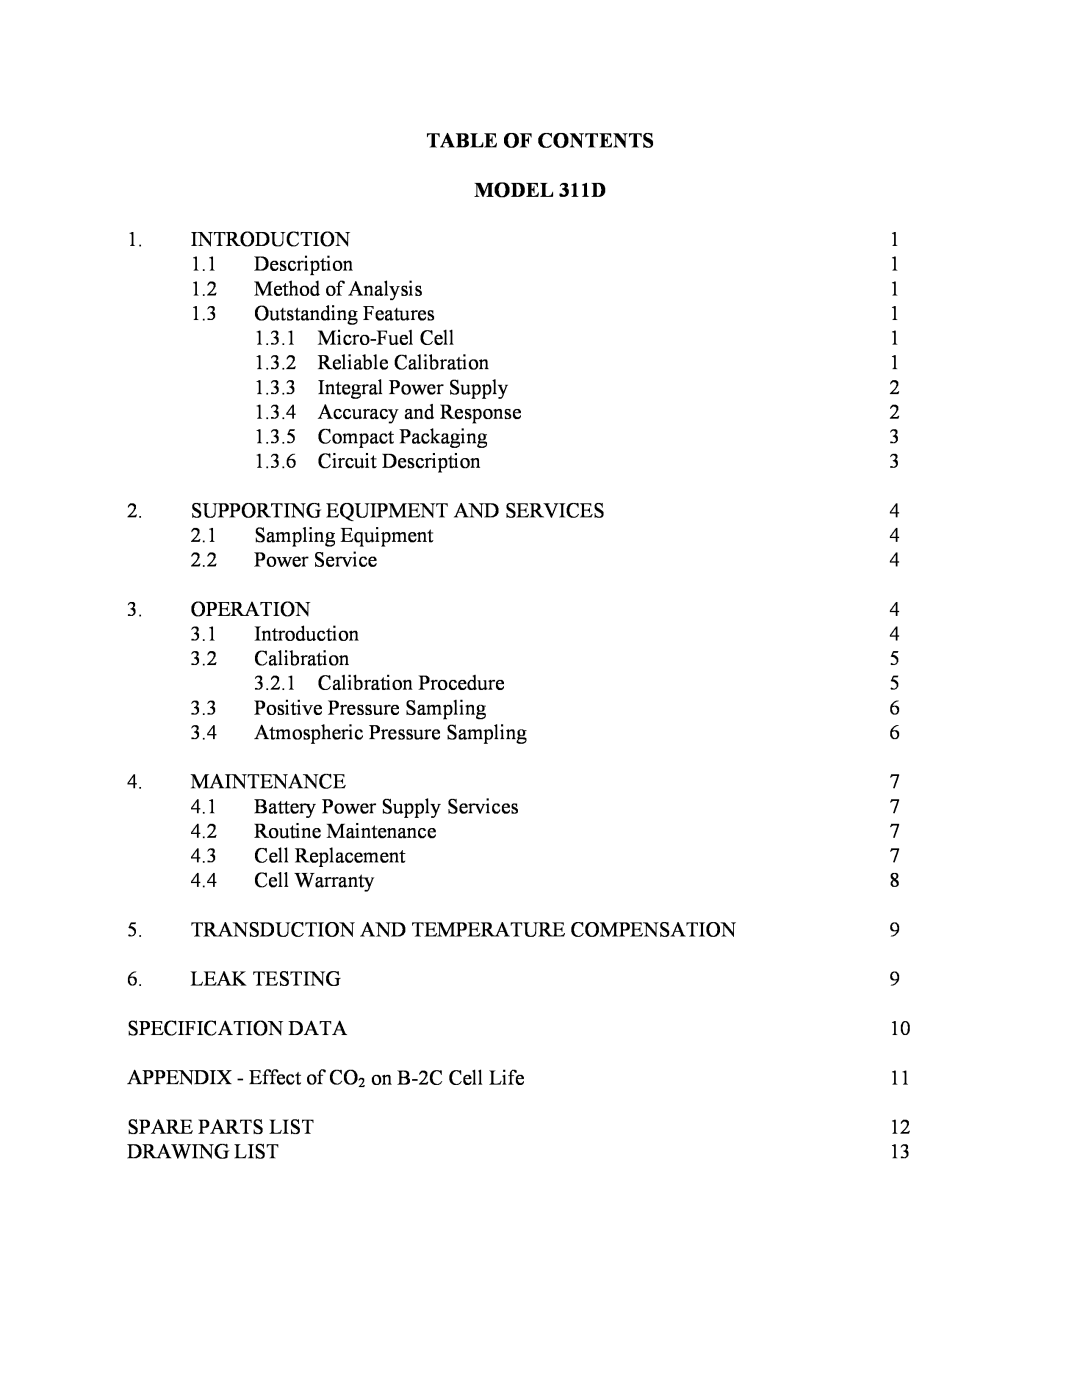 Teledyne 311-D instruction manual Table Of Contents, MODEL 311D 